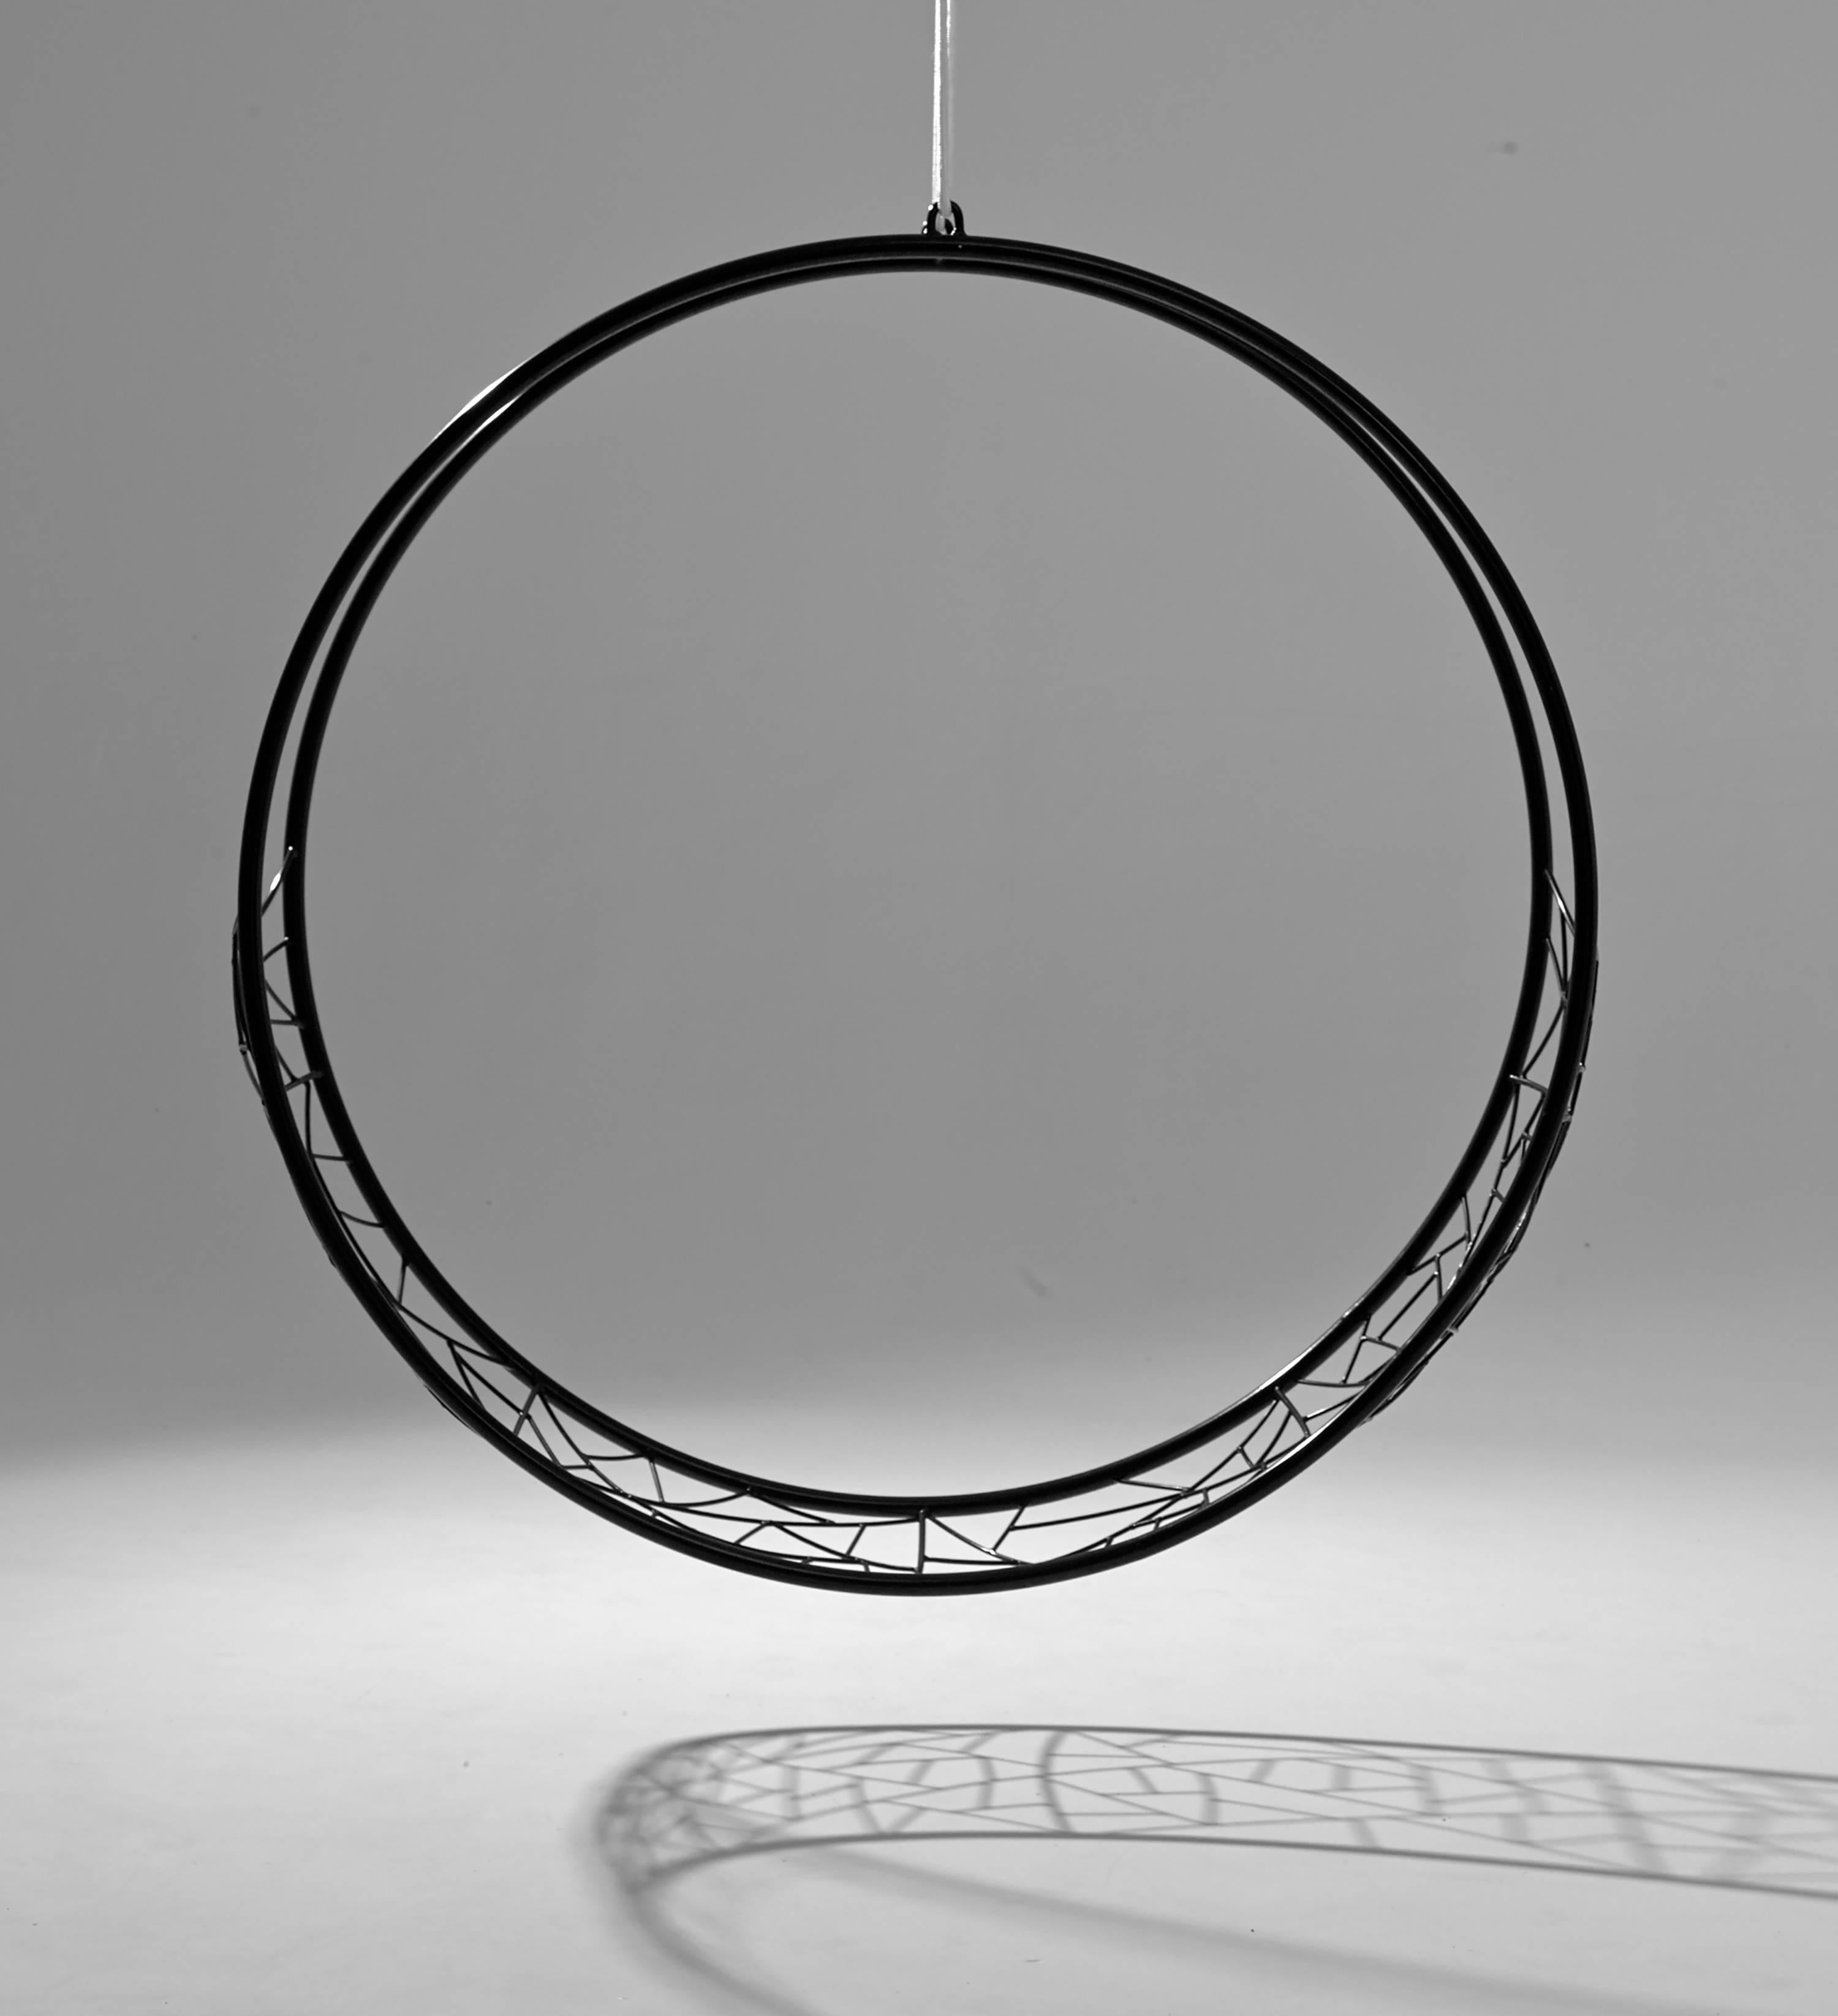 South African Modern, Steel, Outdoor, Hanging Wheel Chair, Circular, White, 21st Century For Sale